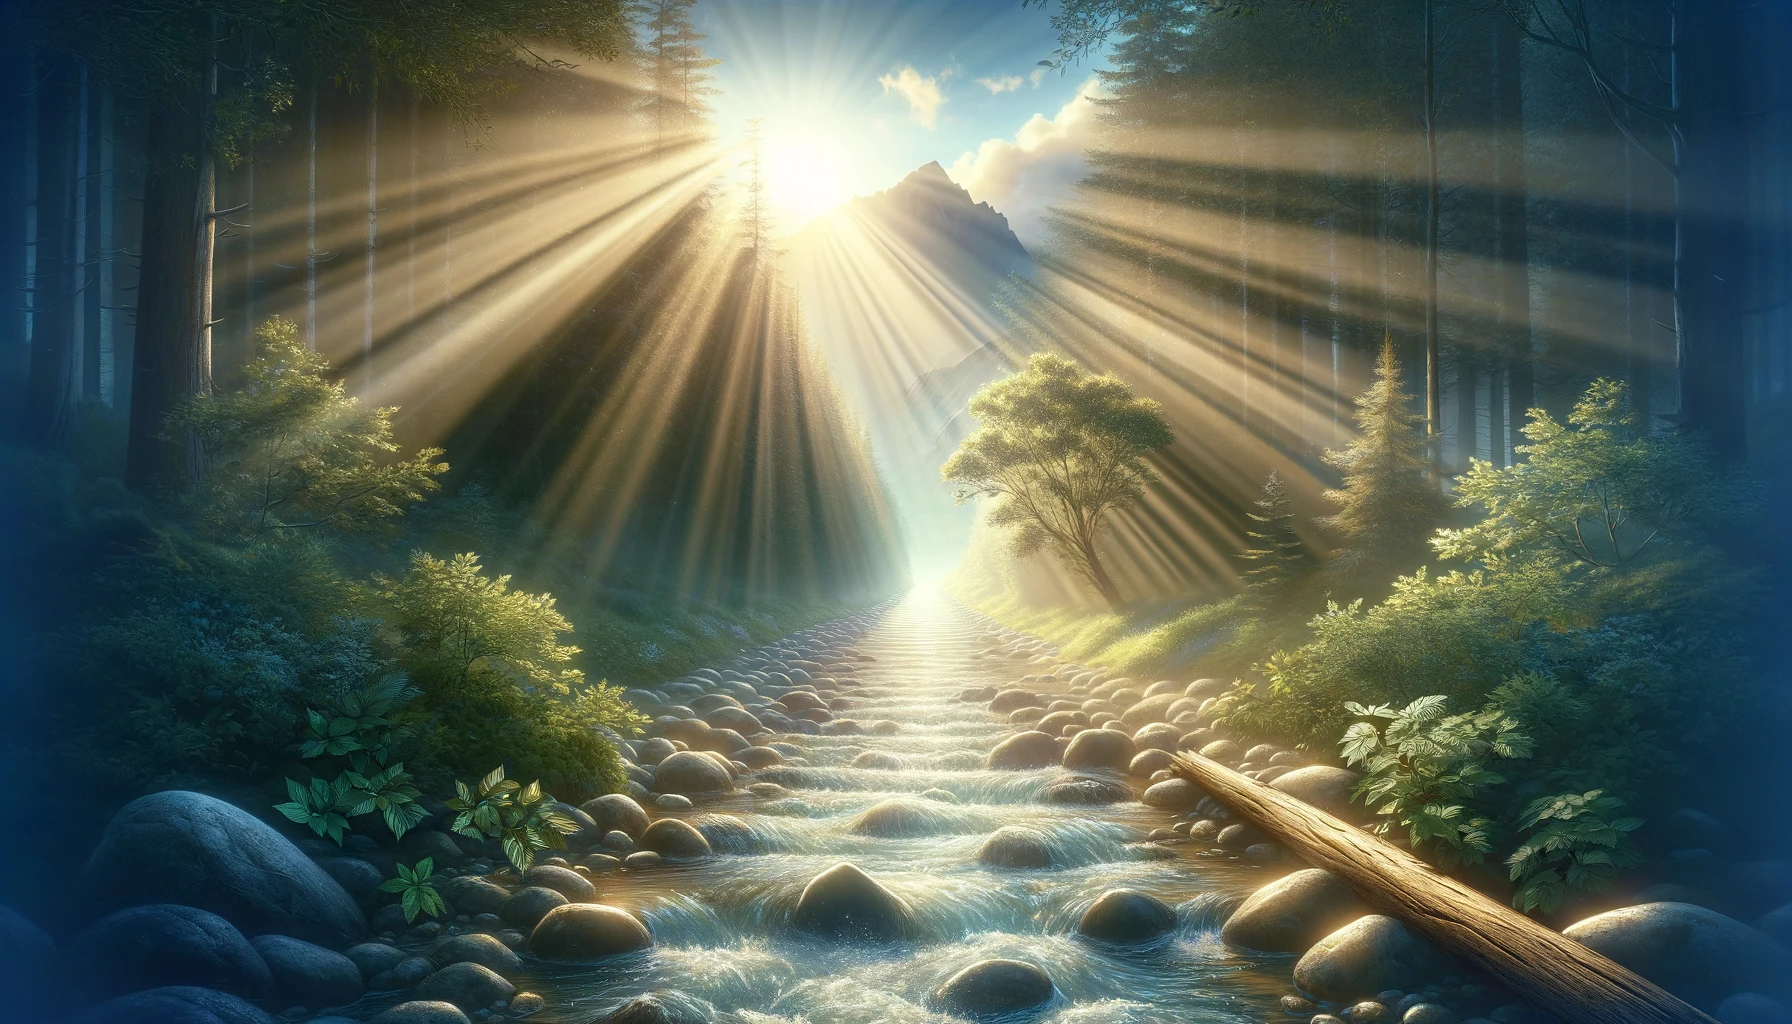 A serene landscape symbolizing a spiritual journey and recovery. The image should depict a winding path leading through a tranquil forest, with beams